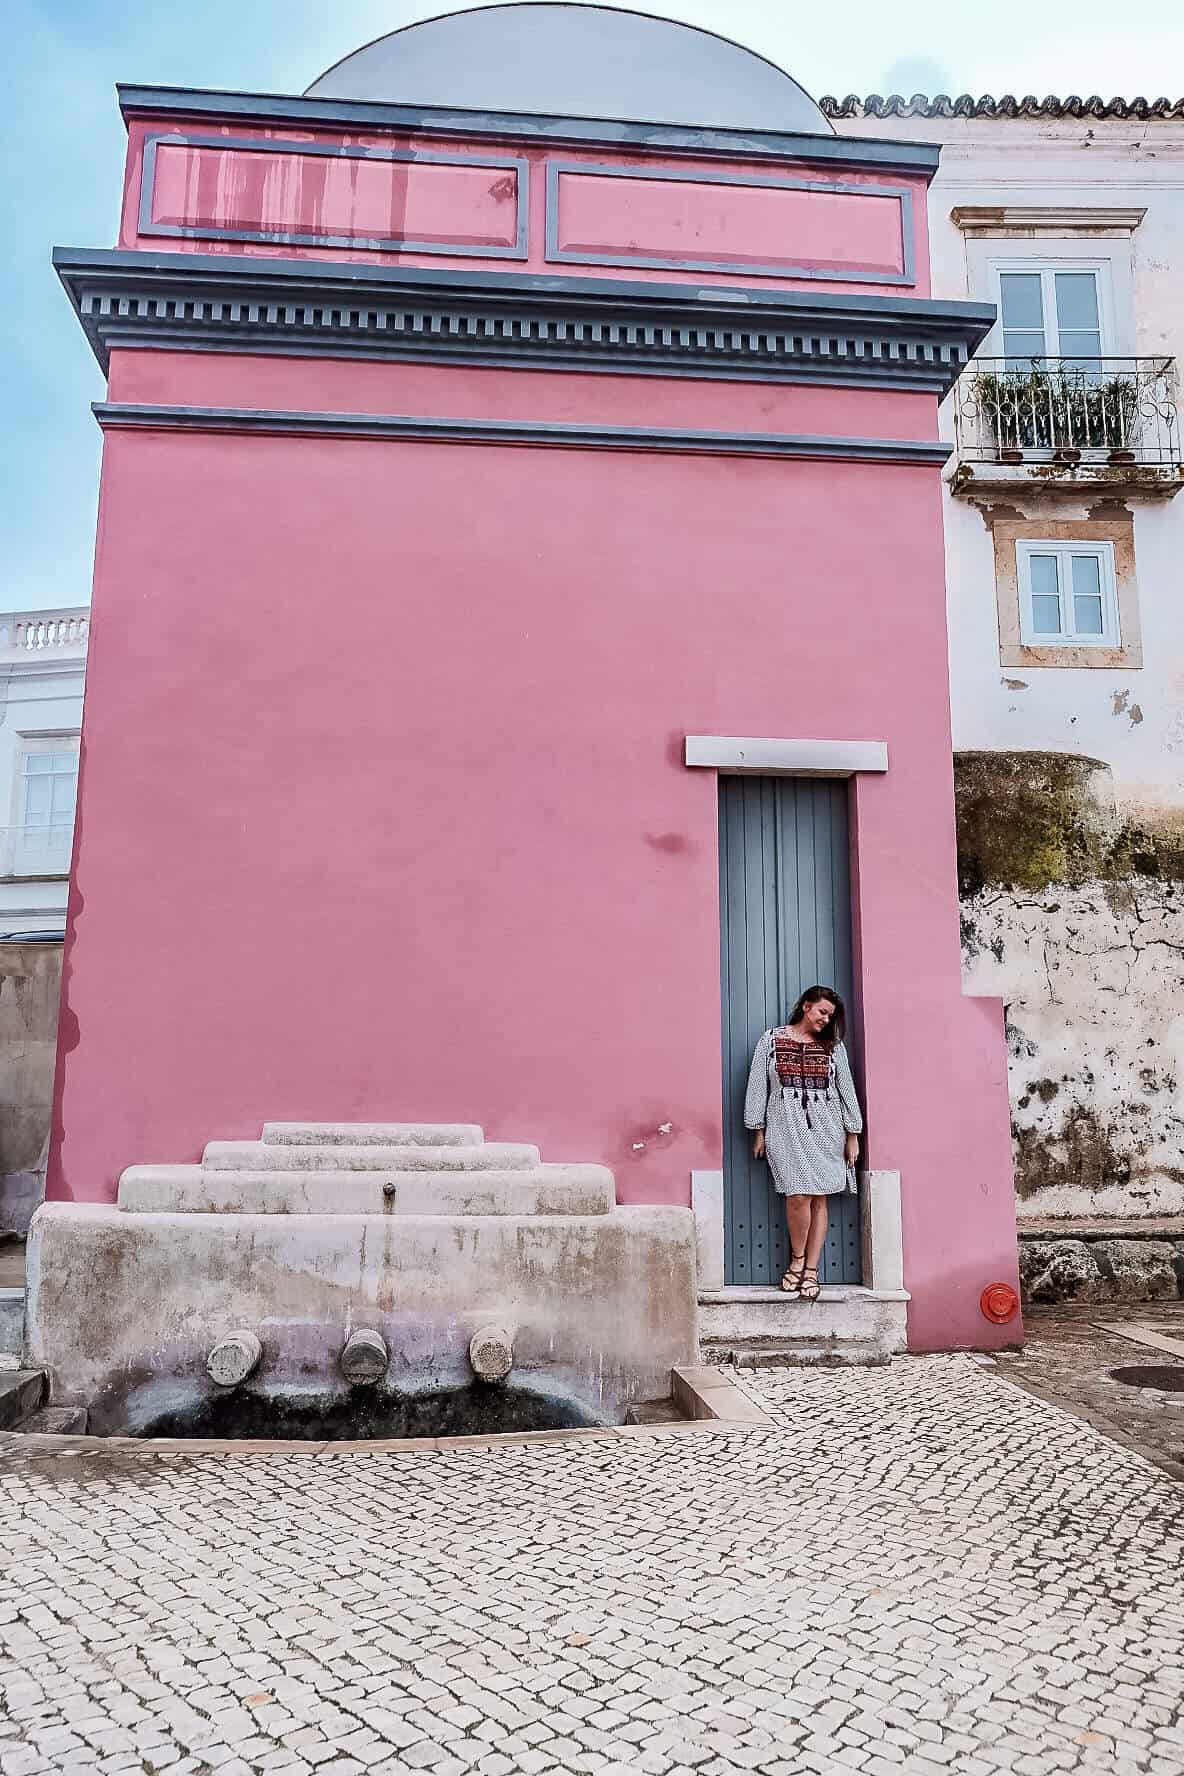 Standing in front of a bright pink building in Old Town Tavira Portugal.